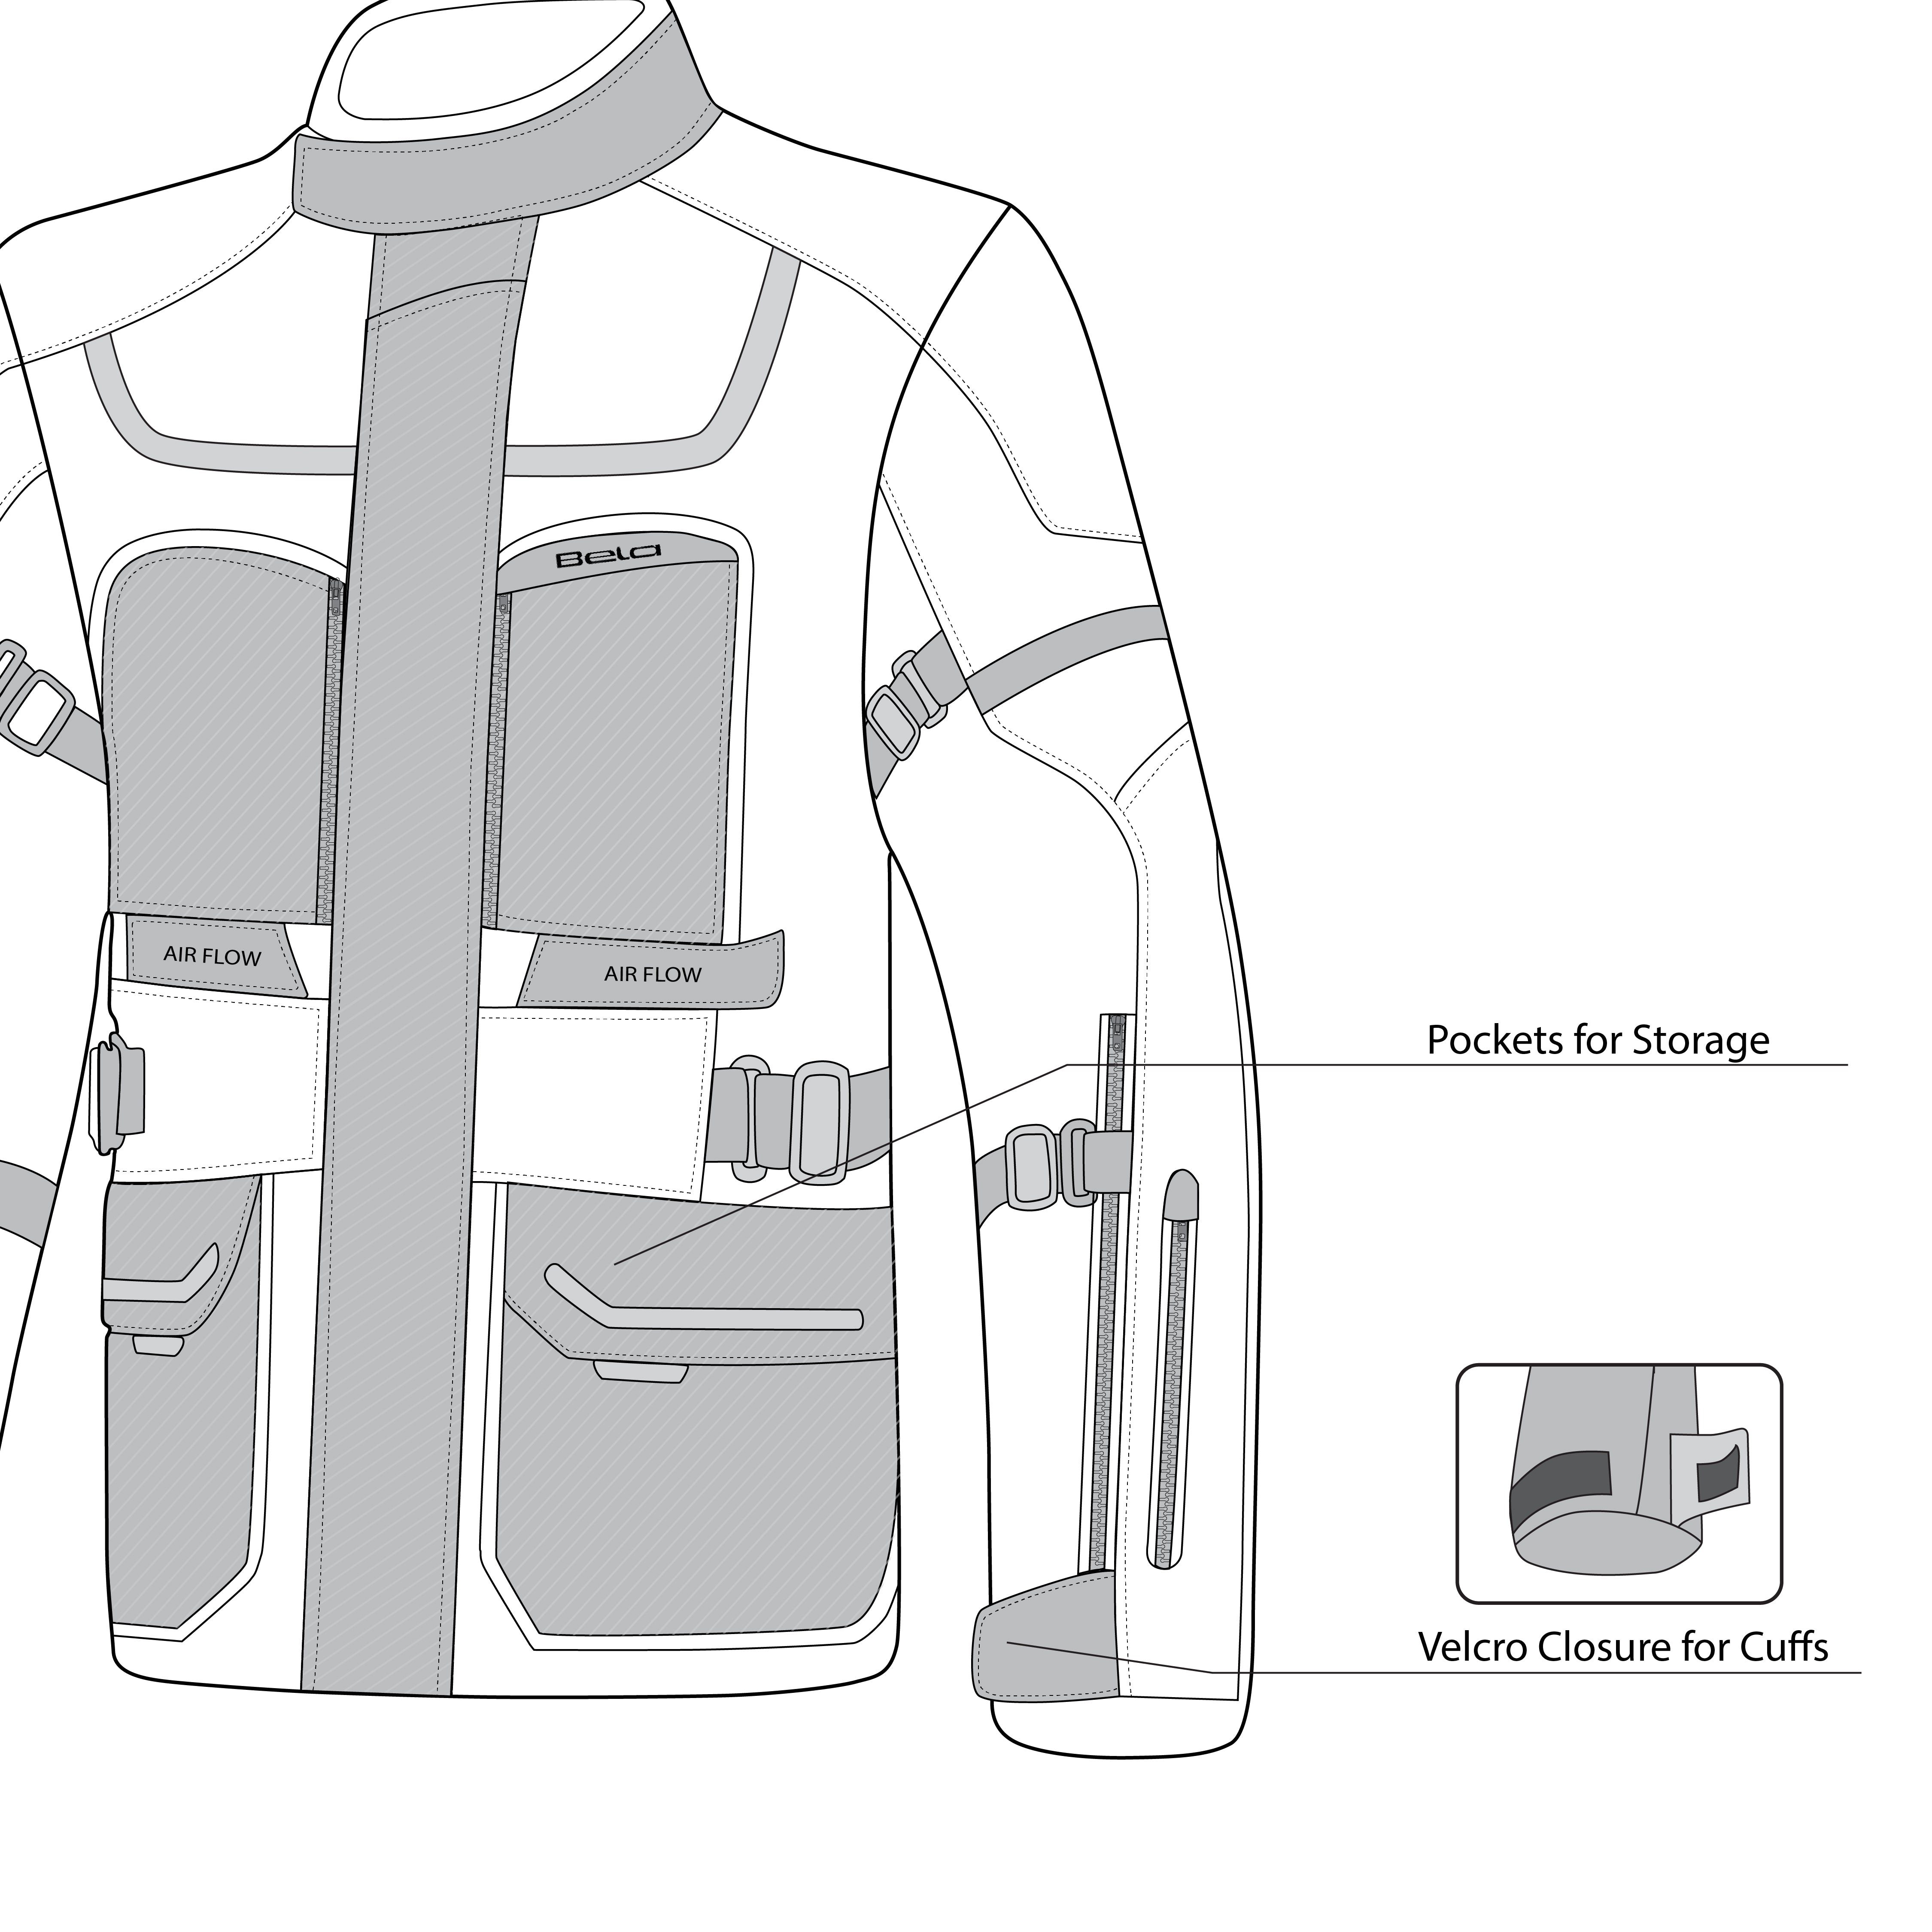 infographic sketch bela transformer the winter jacket ice, black and red front bottom side view